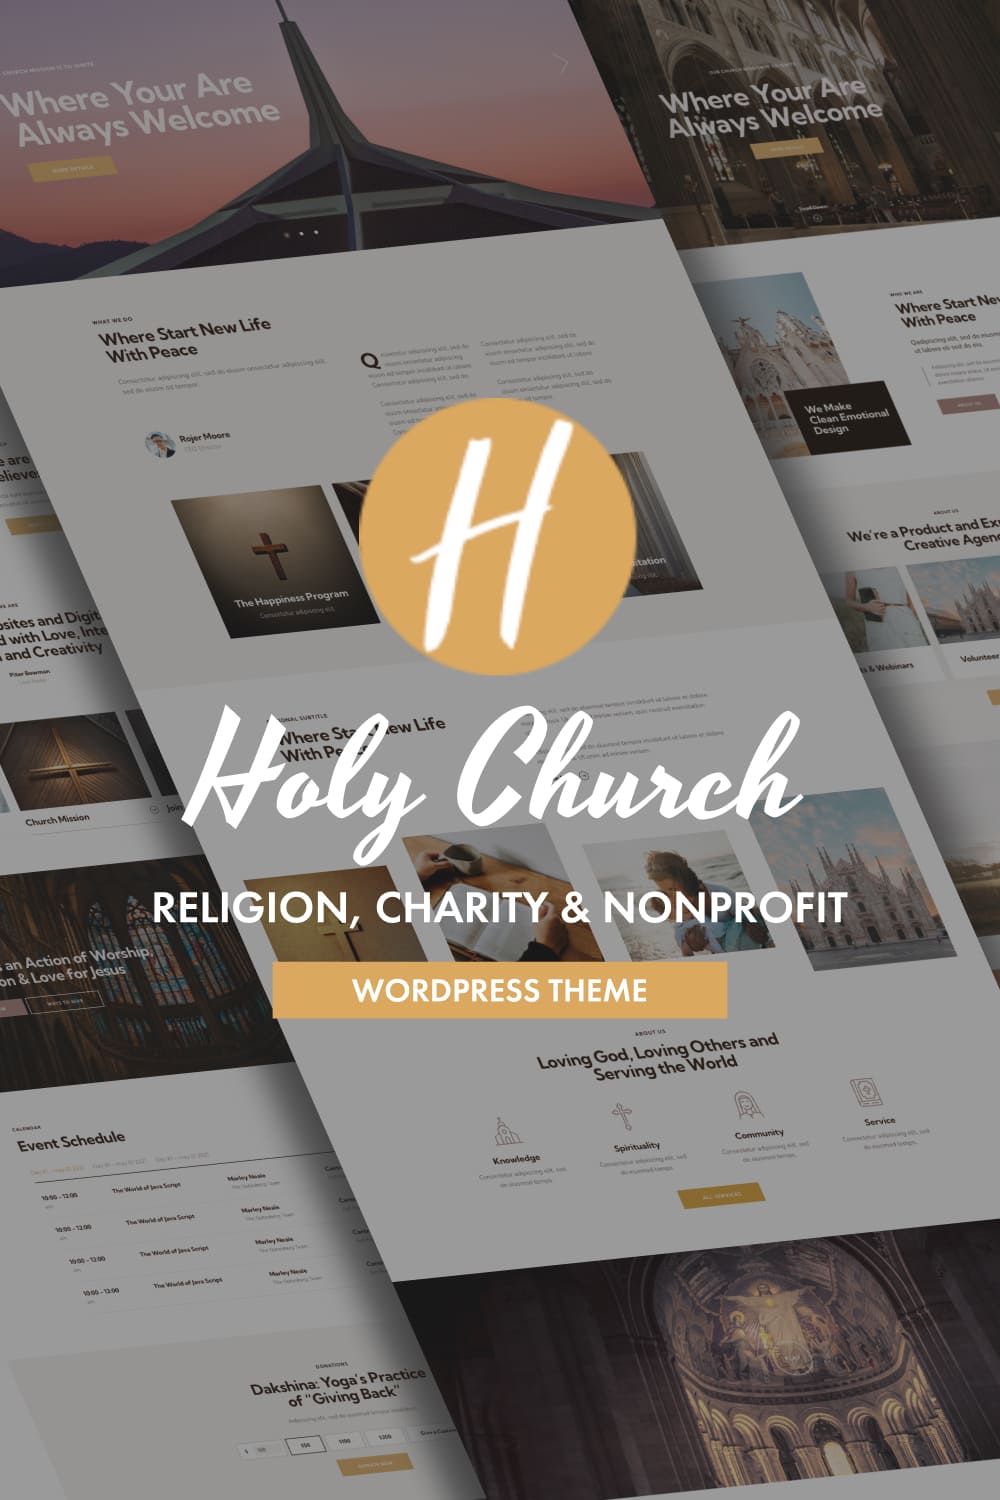 Holy Church Religion, Charity & Nonprofit WordPress Theme, picture for pinterest 1000x1500.